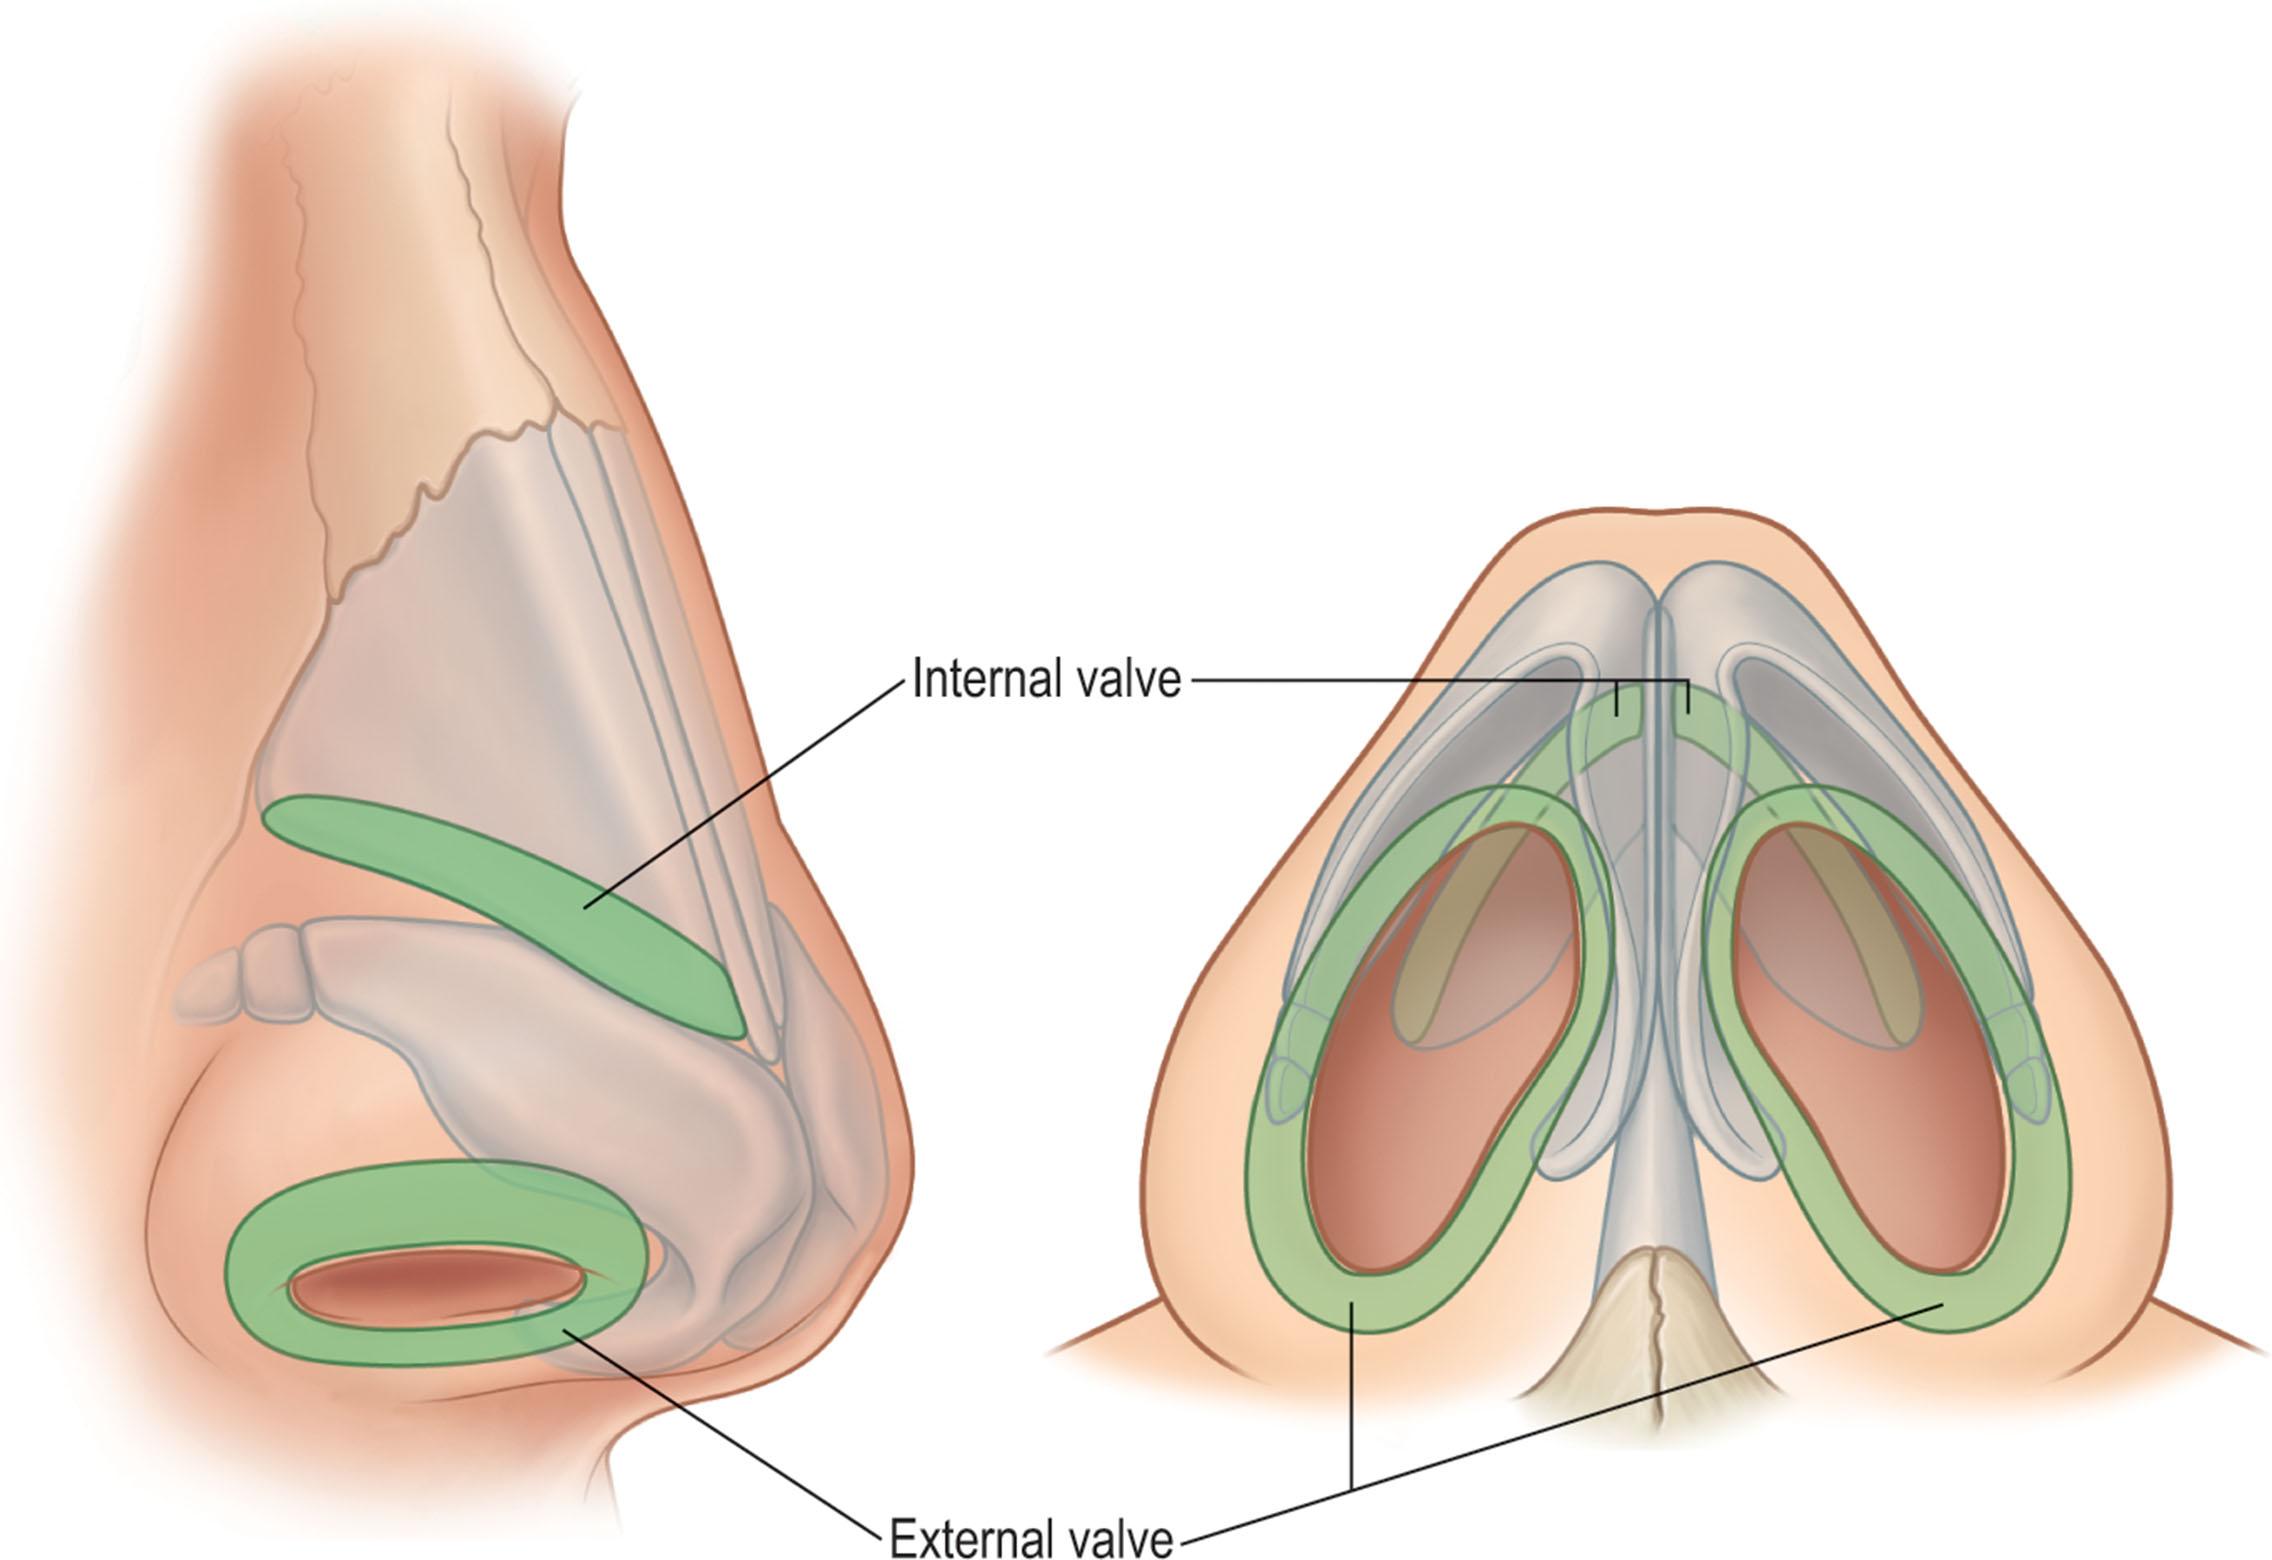 Figure 21.4, The external nasal valve is formed by the caudal edge of the lateral crus of the lower lateral cartilage, the soft-tissue alae, the membranous septum, and the sill of the nostril.